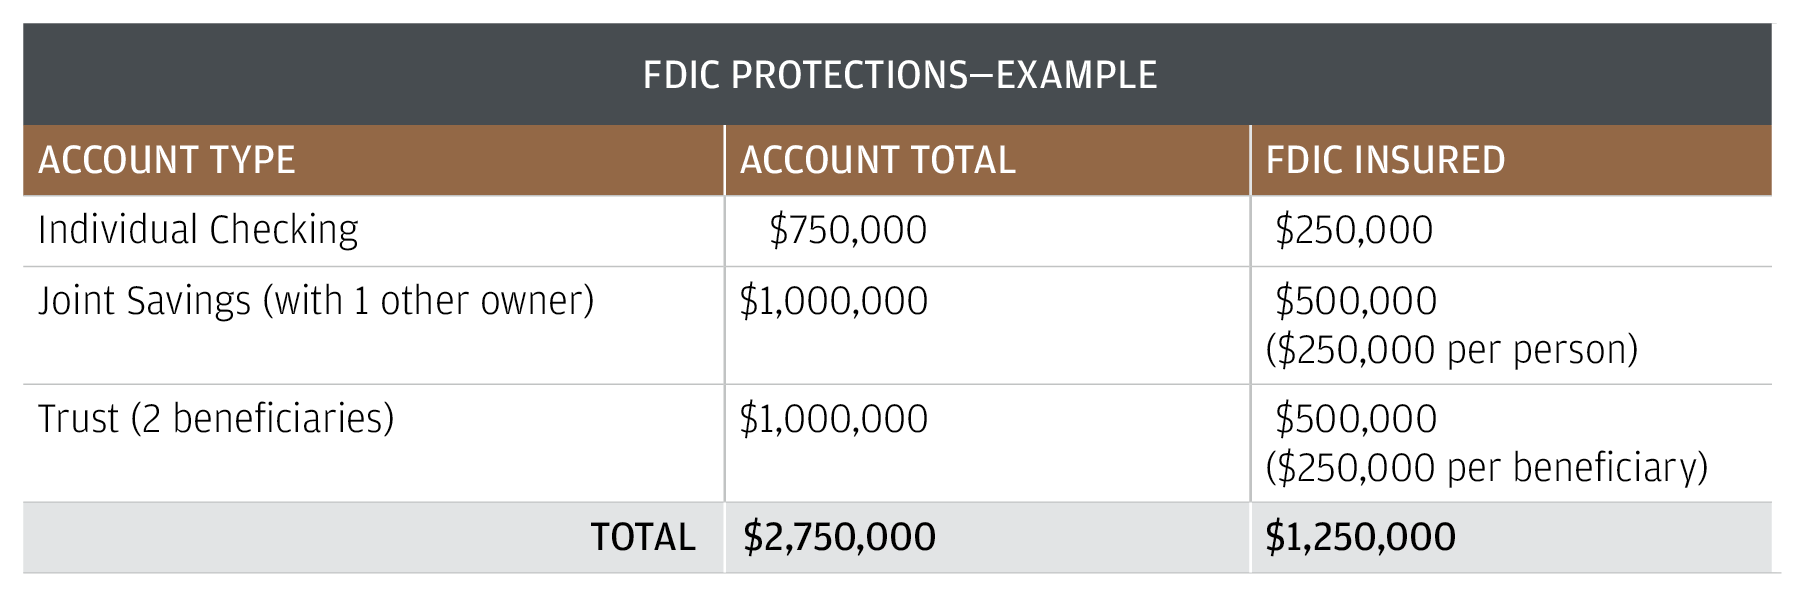 This table includes examples of FDIC protections for different account types.